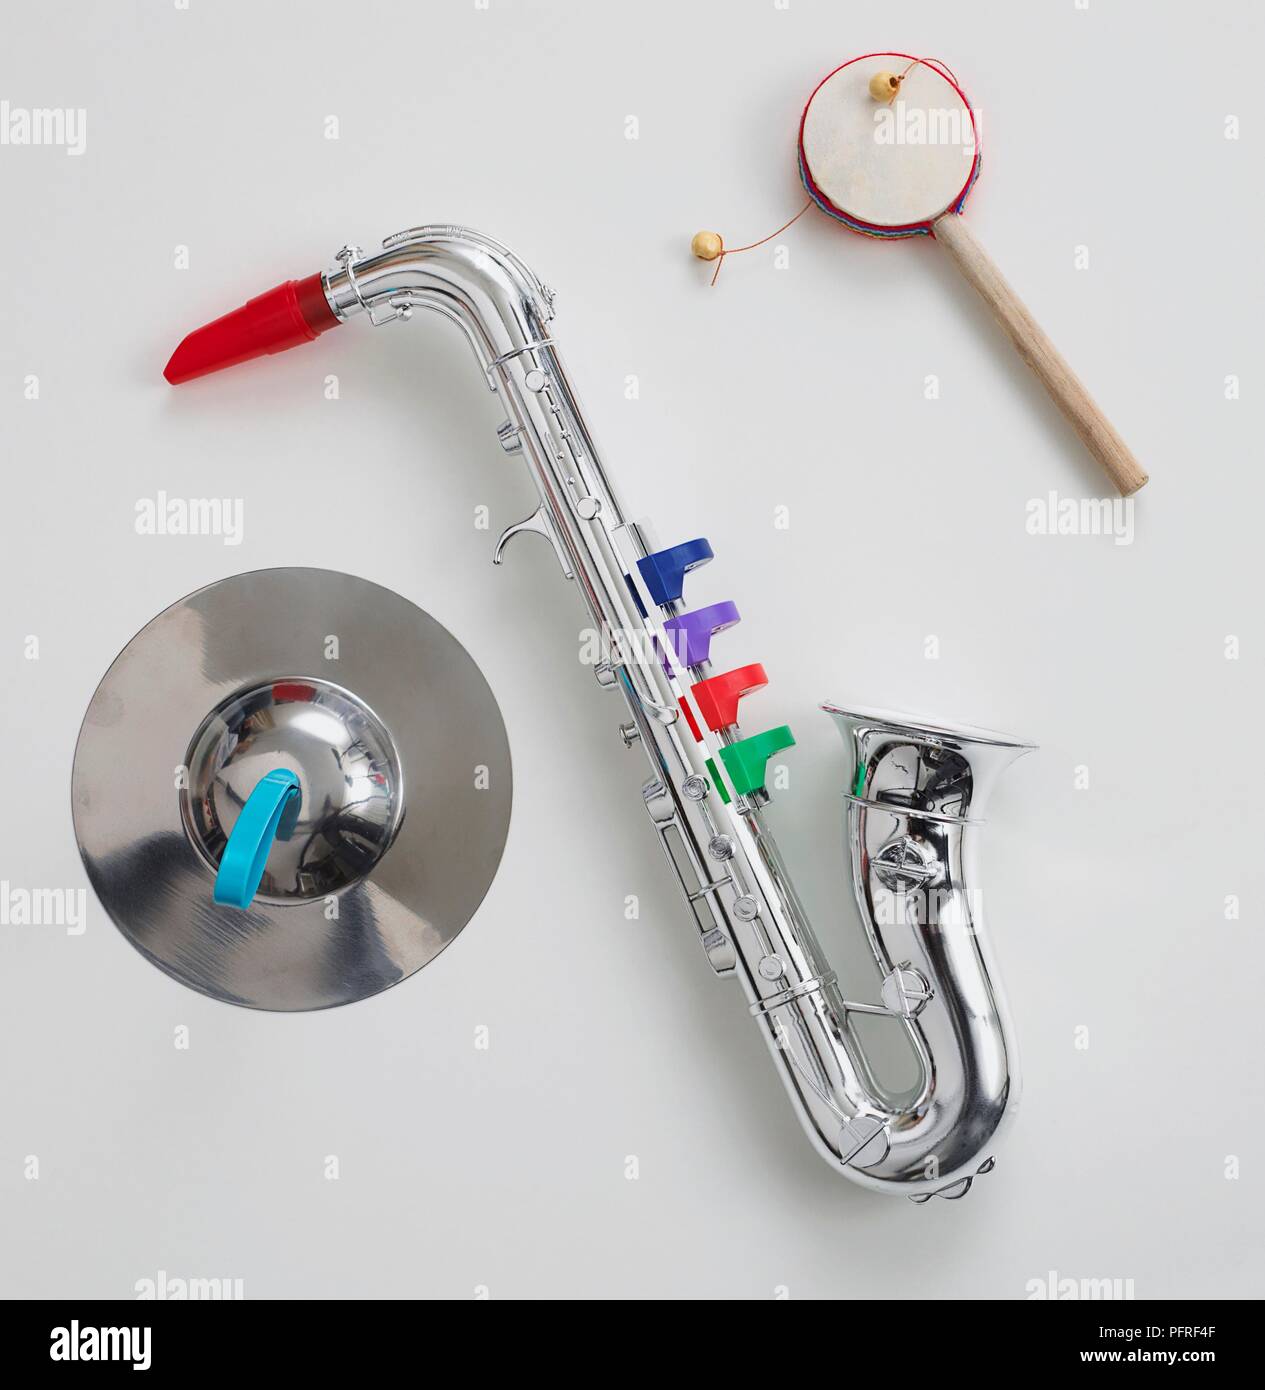 Toy saxophone hi-res stock photography and images - Alamy